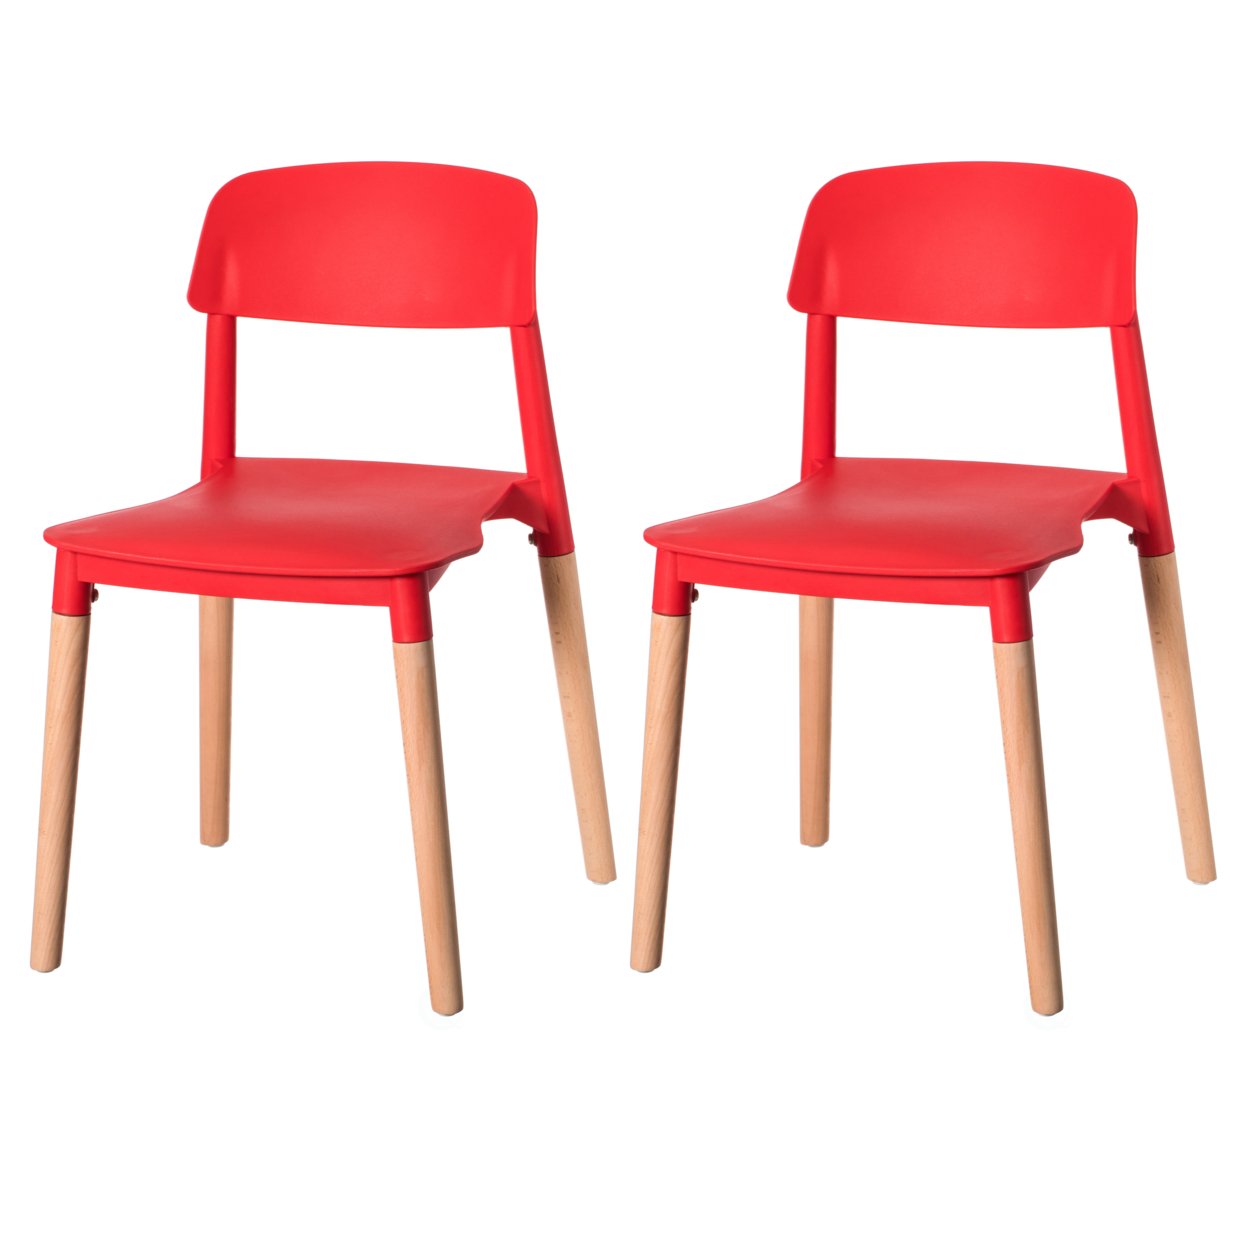 Modern Plastic Dining Chair Open Back With Beech Wood Legs - Set Of 2 Red